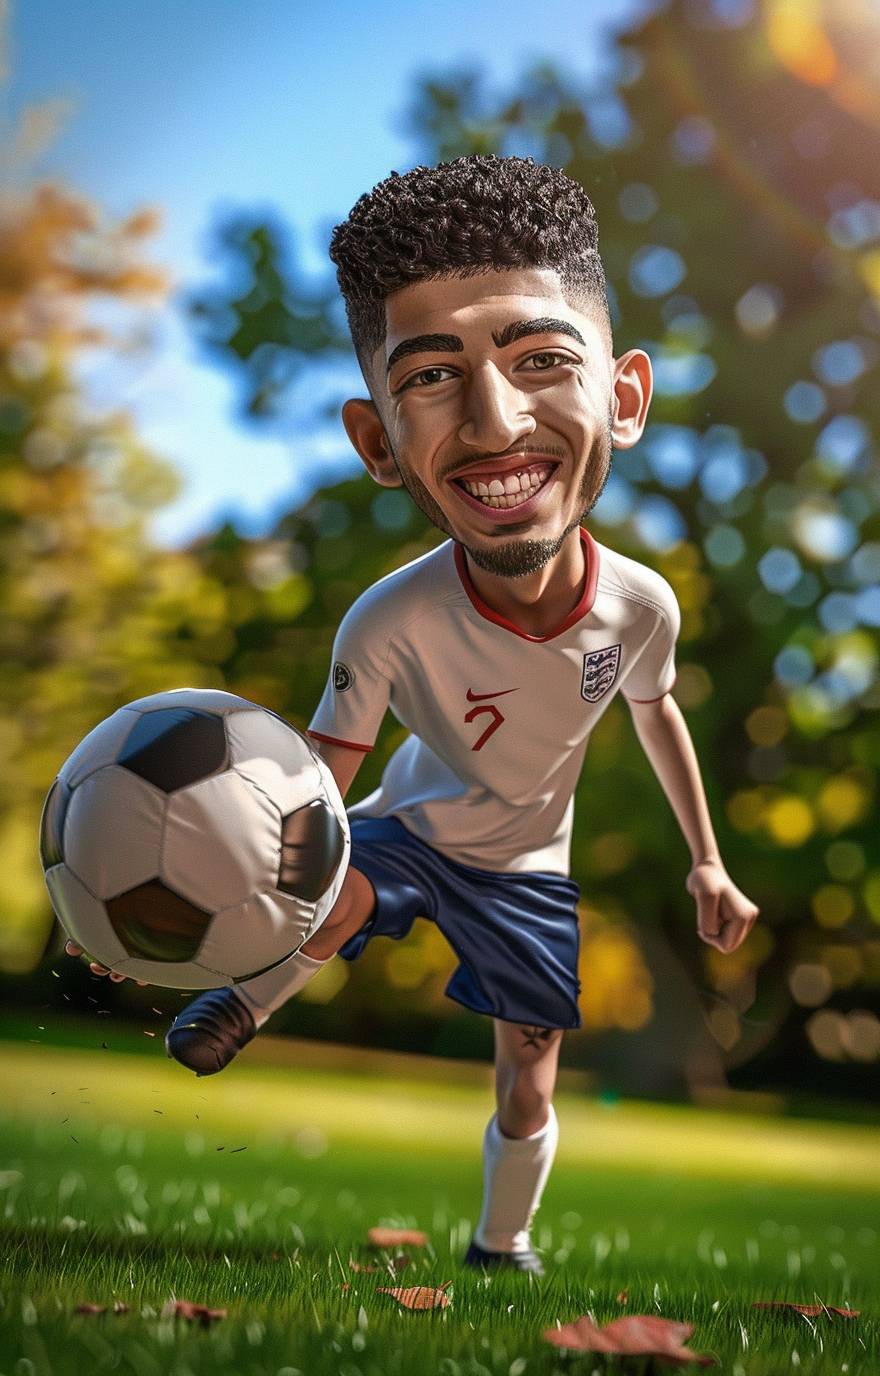 Photorealistic Jude Bellingham playing soccer, smiling, big head caricature